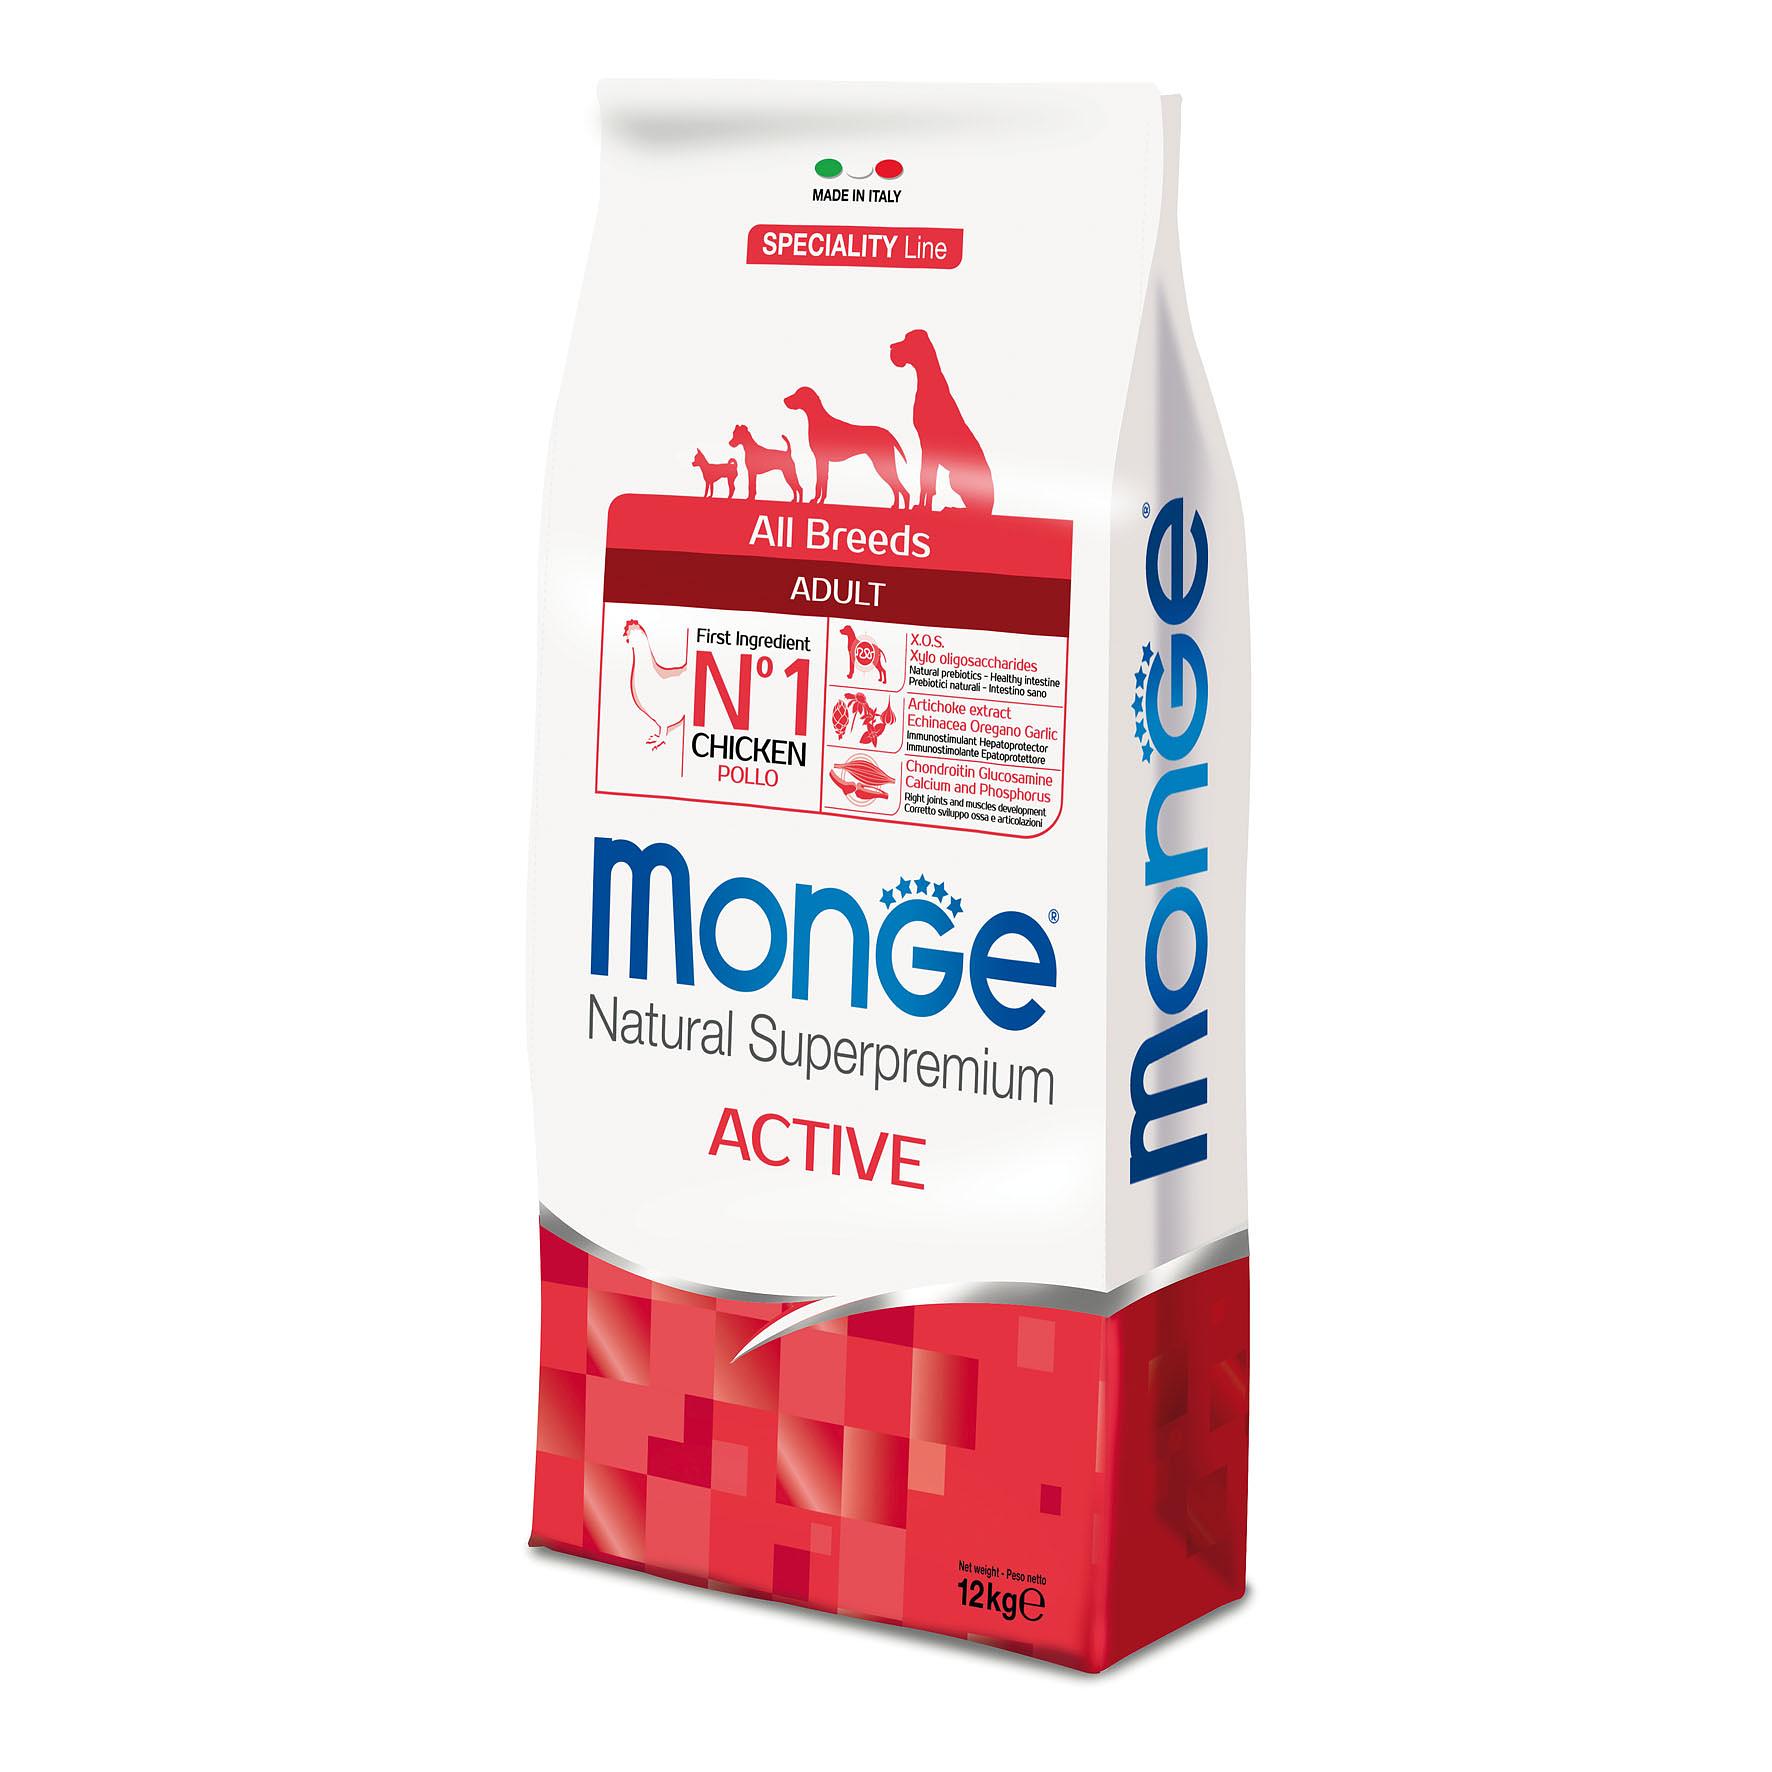 Monge Speciality Line -Adult Active Huhn